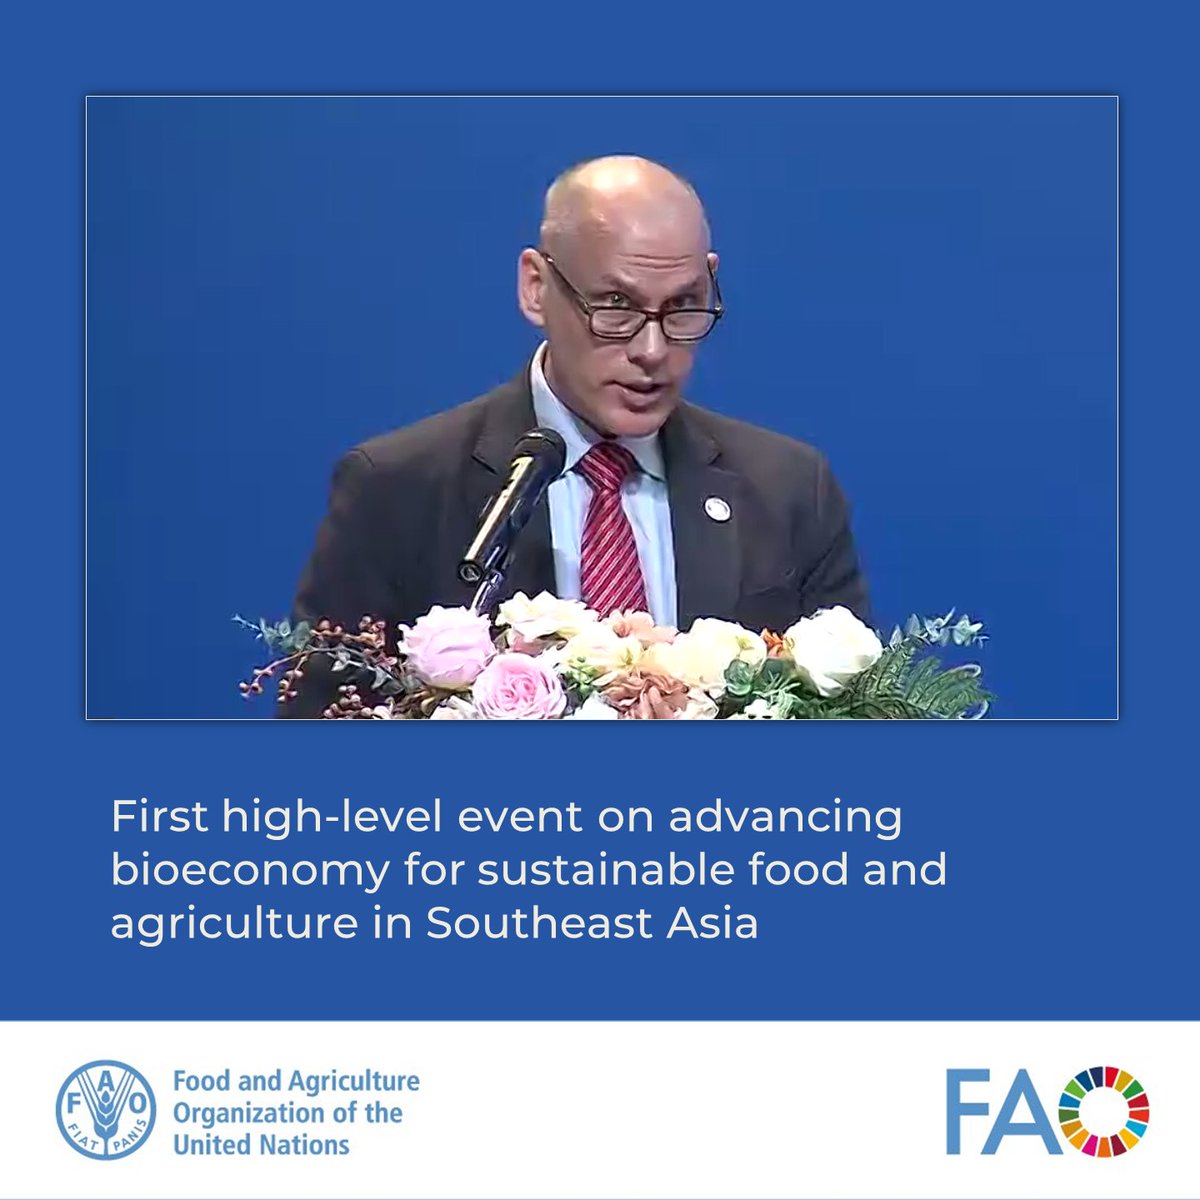 'Bioeconomy provides a range of mitigating opportunities, particularly in field of agriculture, with use of science, technology & innovation to transform agrifood systems & imperative of food security & nutrition', Robert Simpson @FAO's Special Advisor & Regional Programme Leader